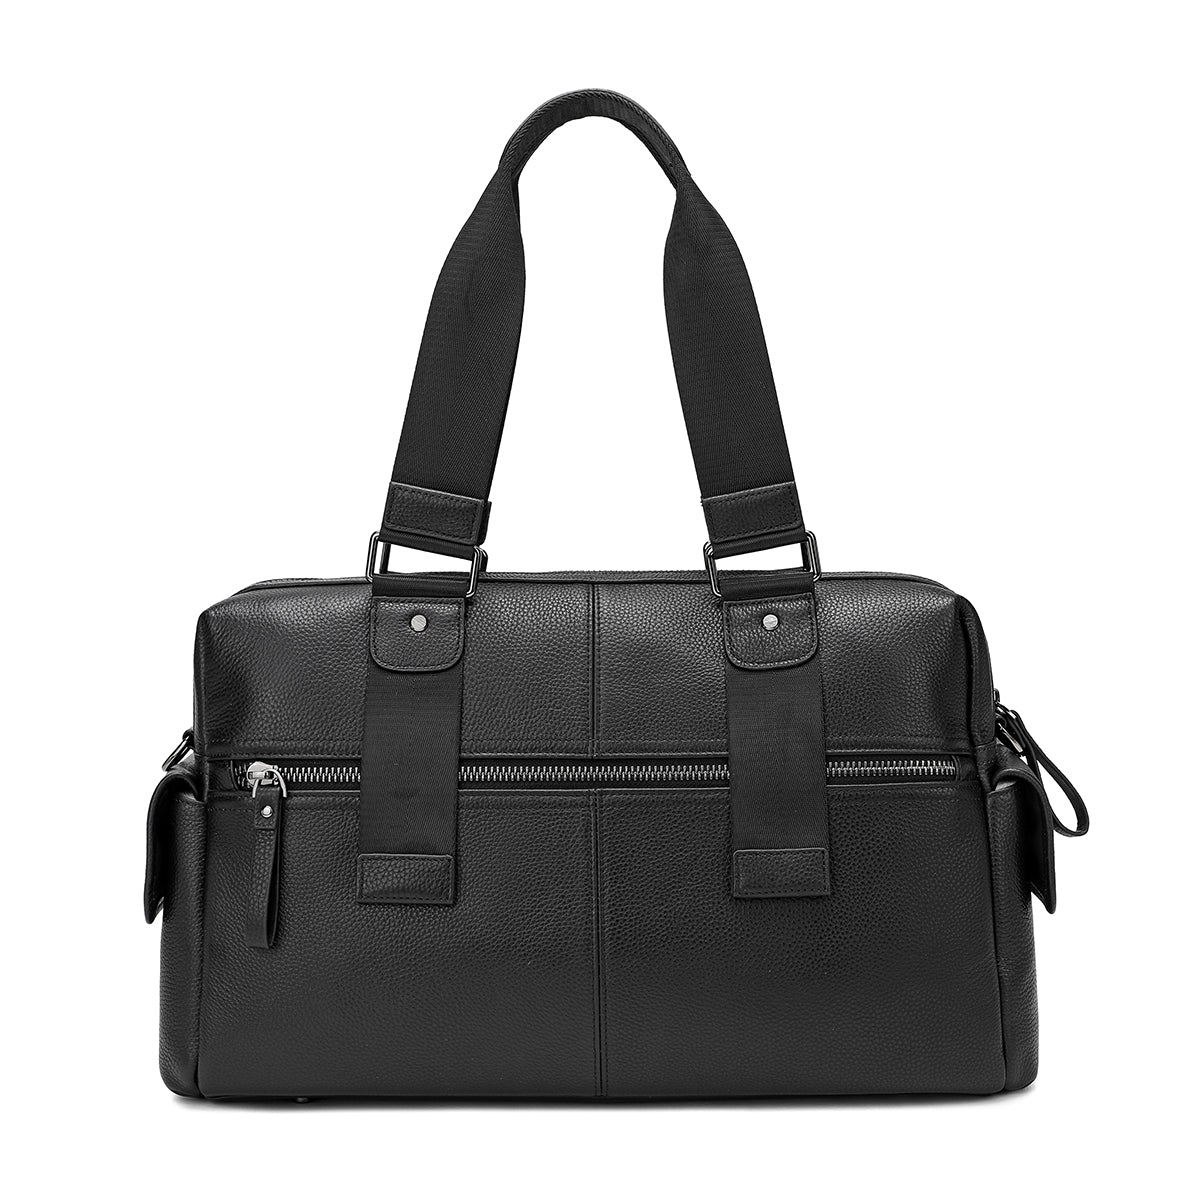 Multi-use laptop bag made of 100% natural leather, high quality